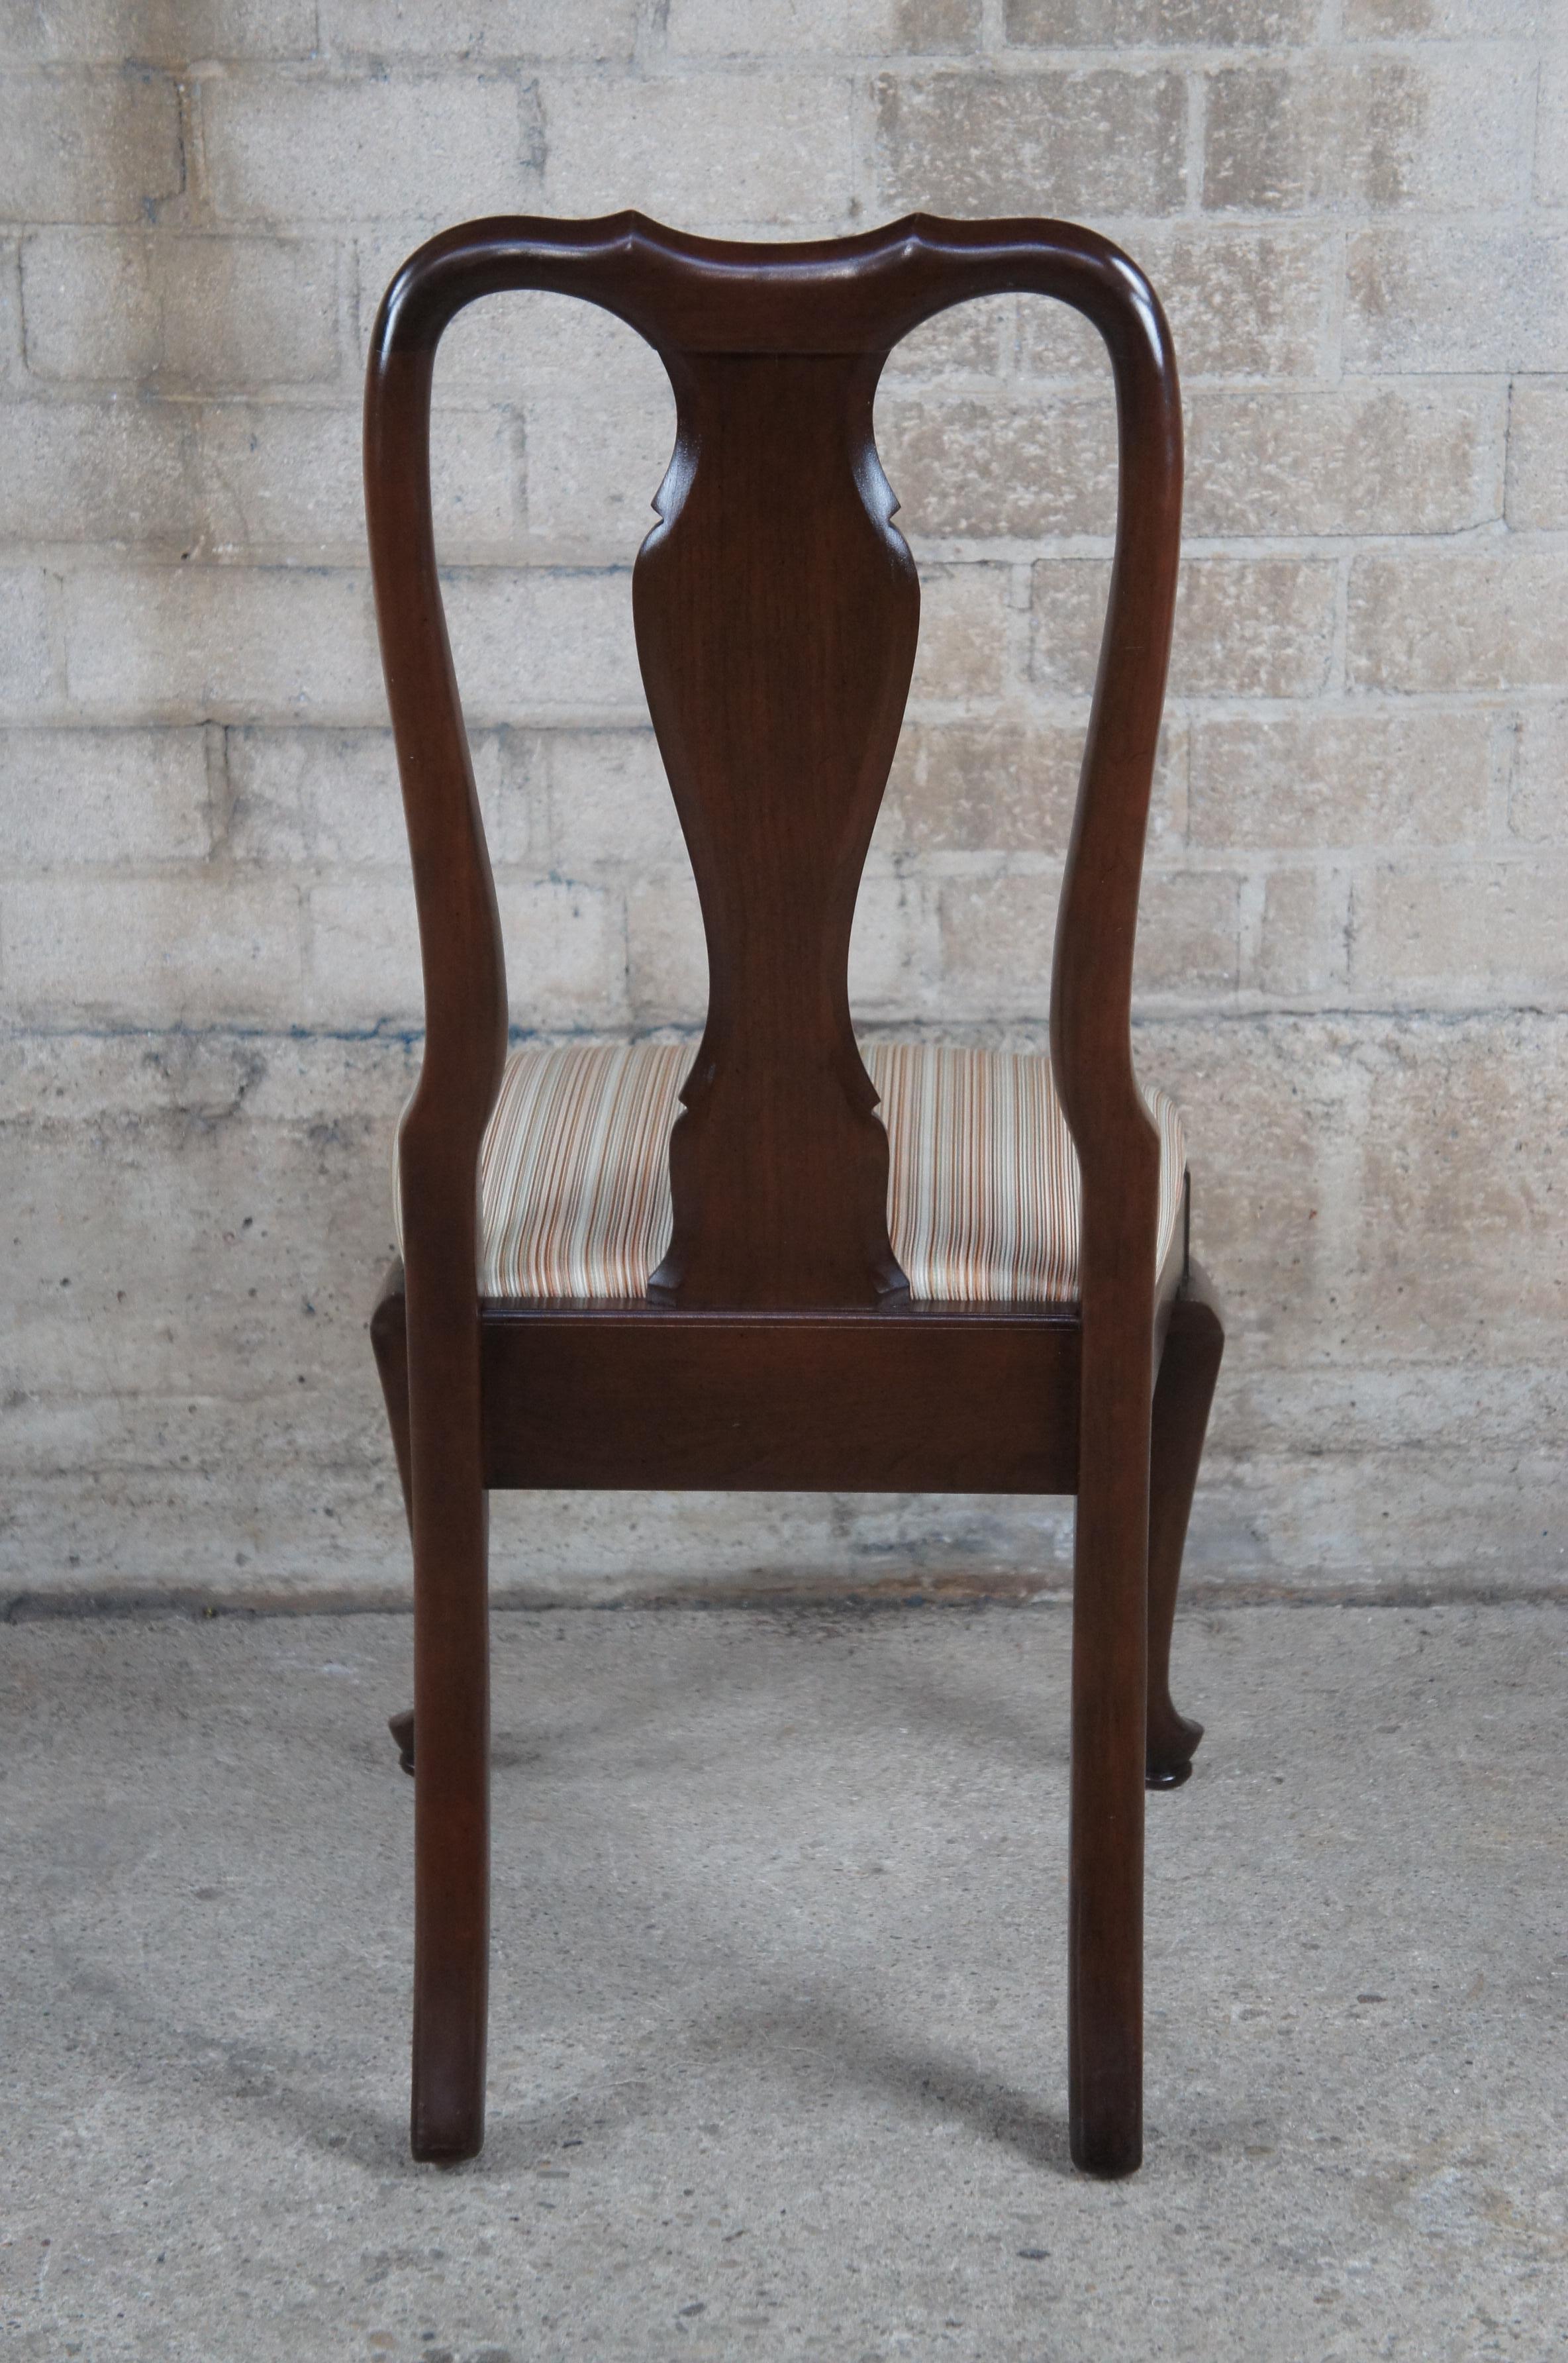 Upholstery 6 Vintage Ethan Allen Georgian Court Queen Anne Cherry Dining Chairs 11-6211